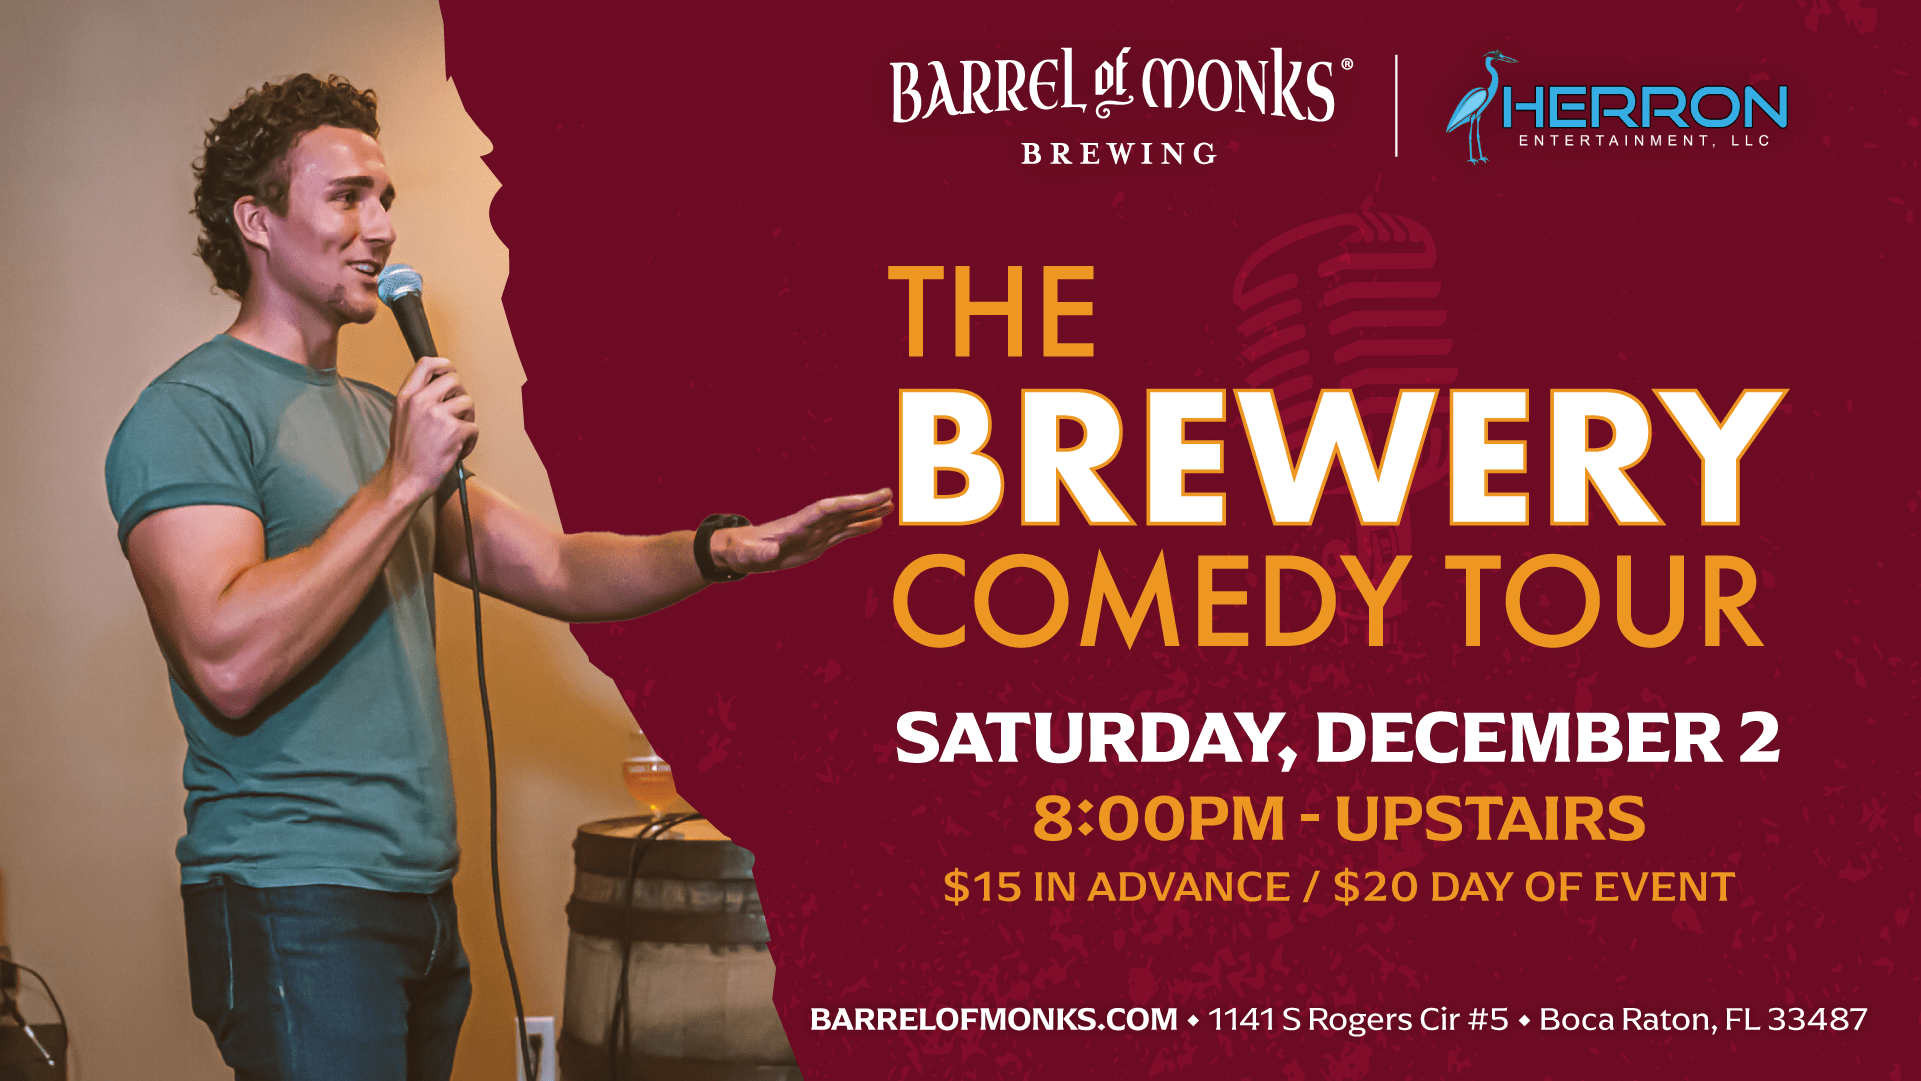 Brewery Comedy Tour at Barrel of Monks in Boca Raton